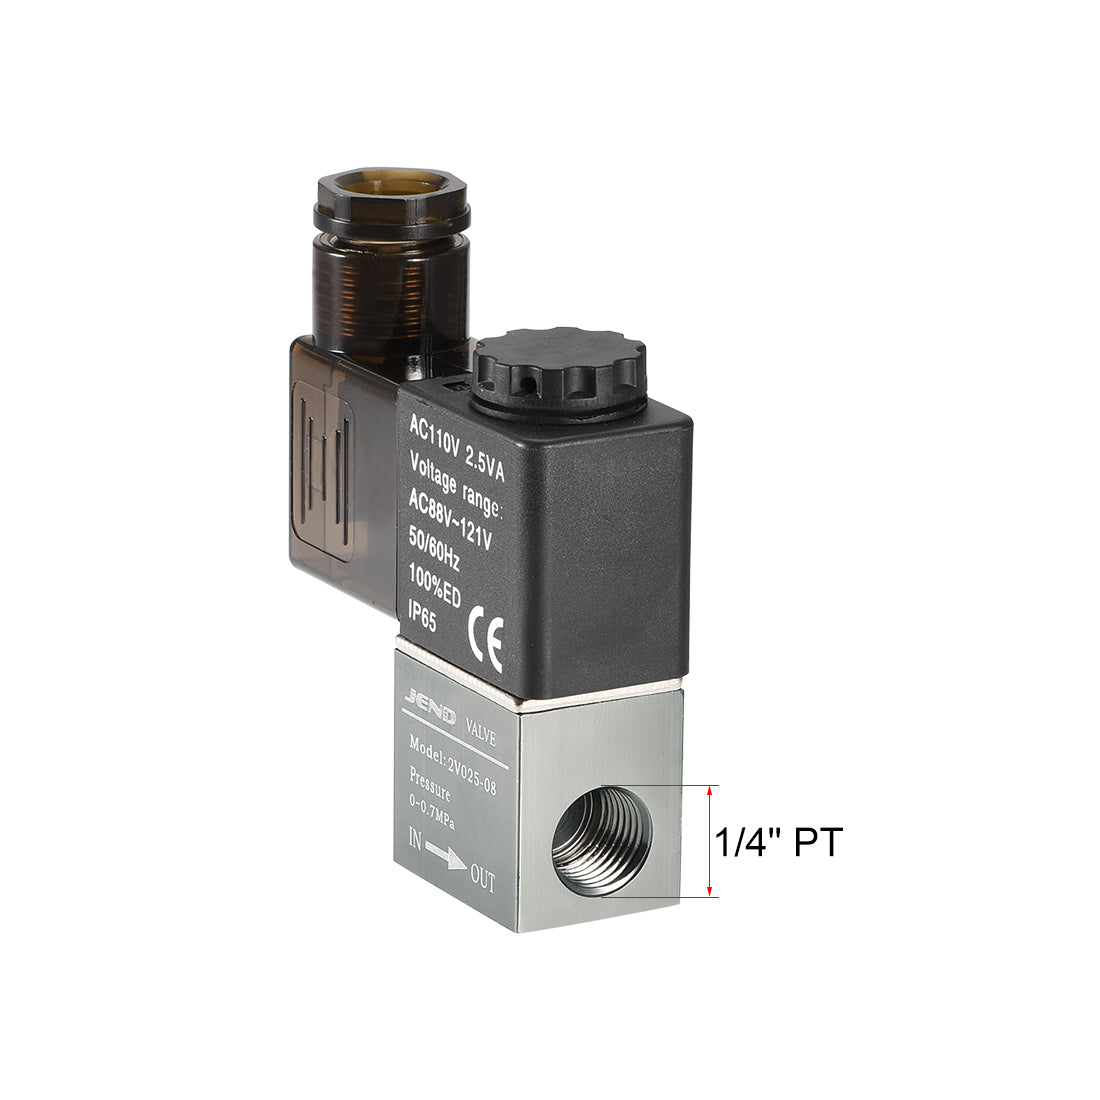 uxcell Uxcell 2V025-08 Pneumatic Air NC Single Electrical Control Solenoid Valve AC 110V 2 Way 2 Position 1/4" PT Thread Internally Piloted Acting Type Red Light